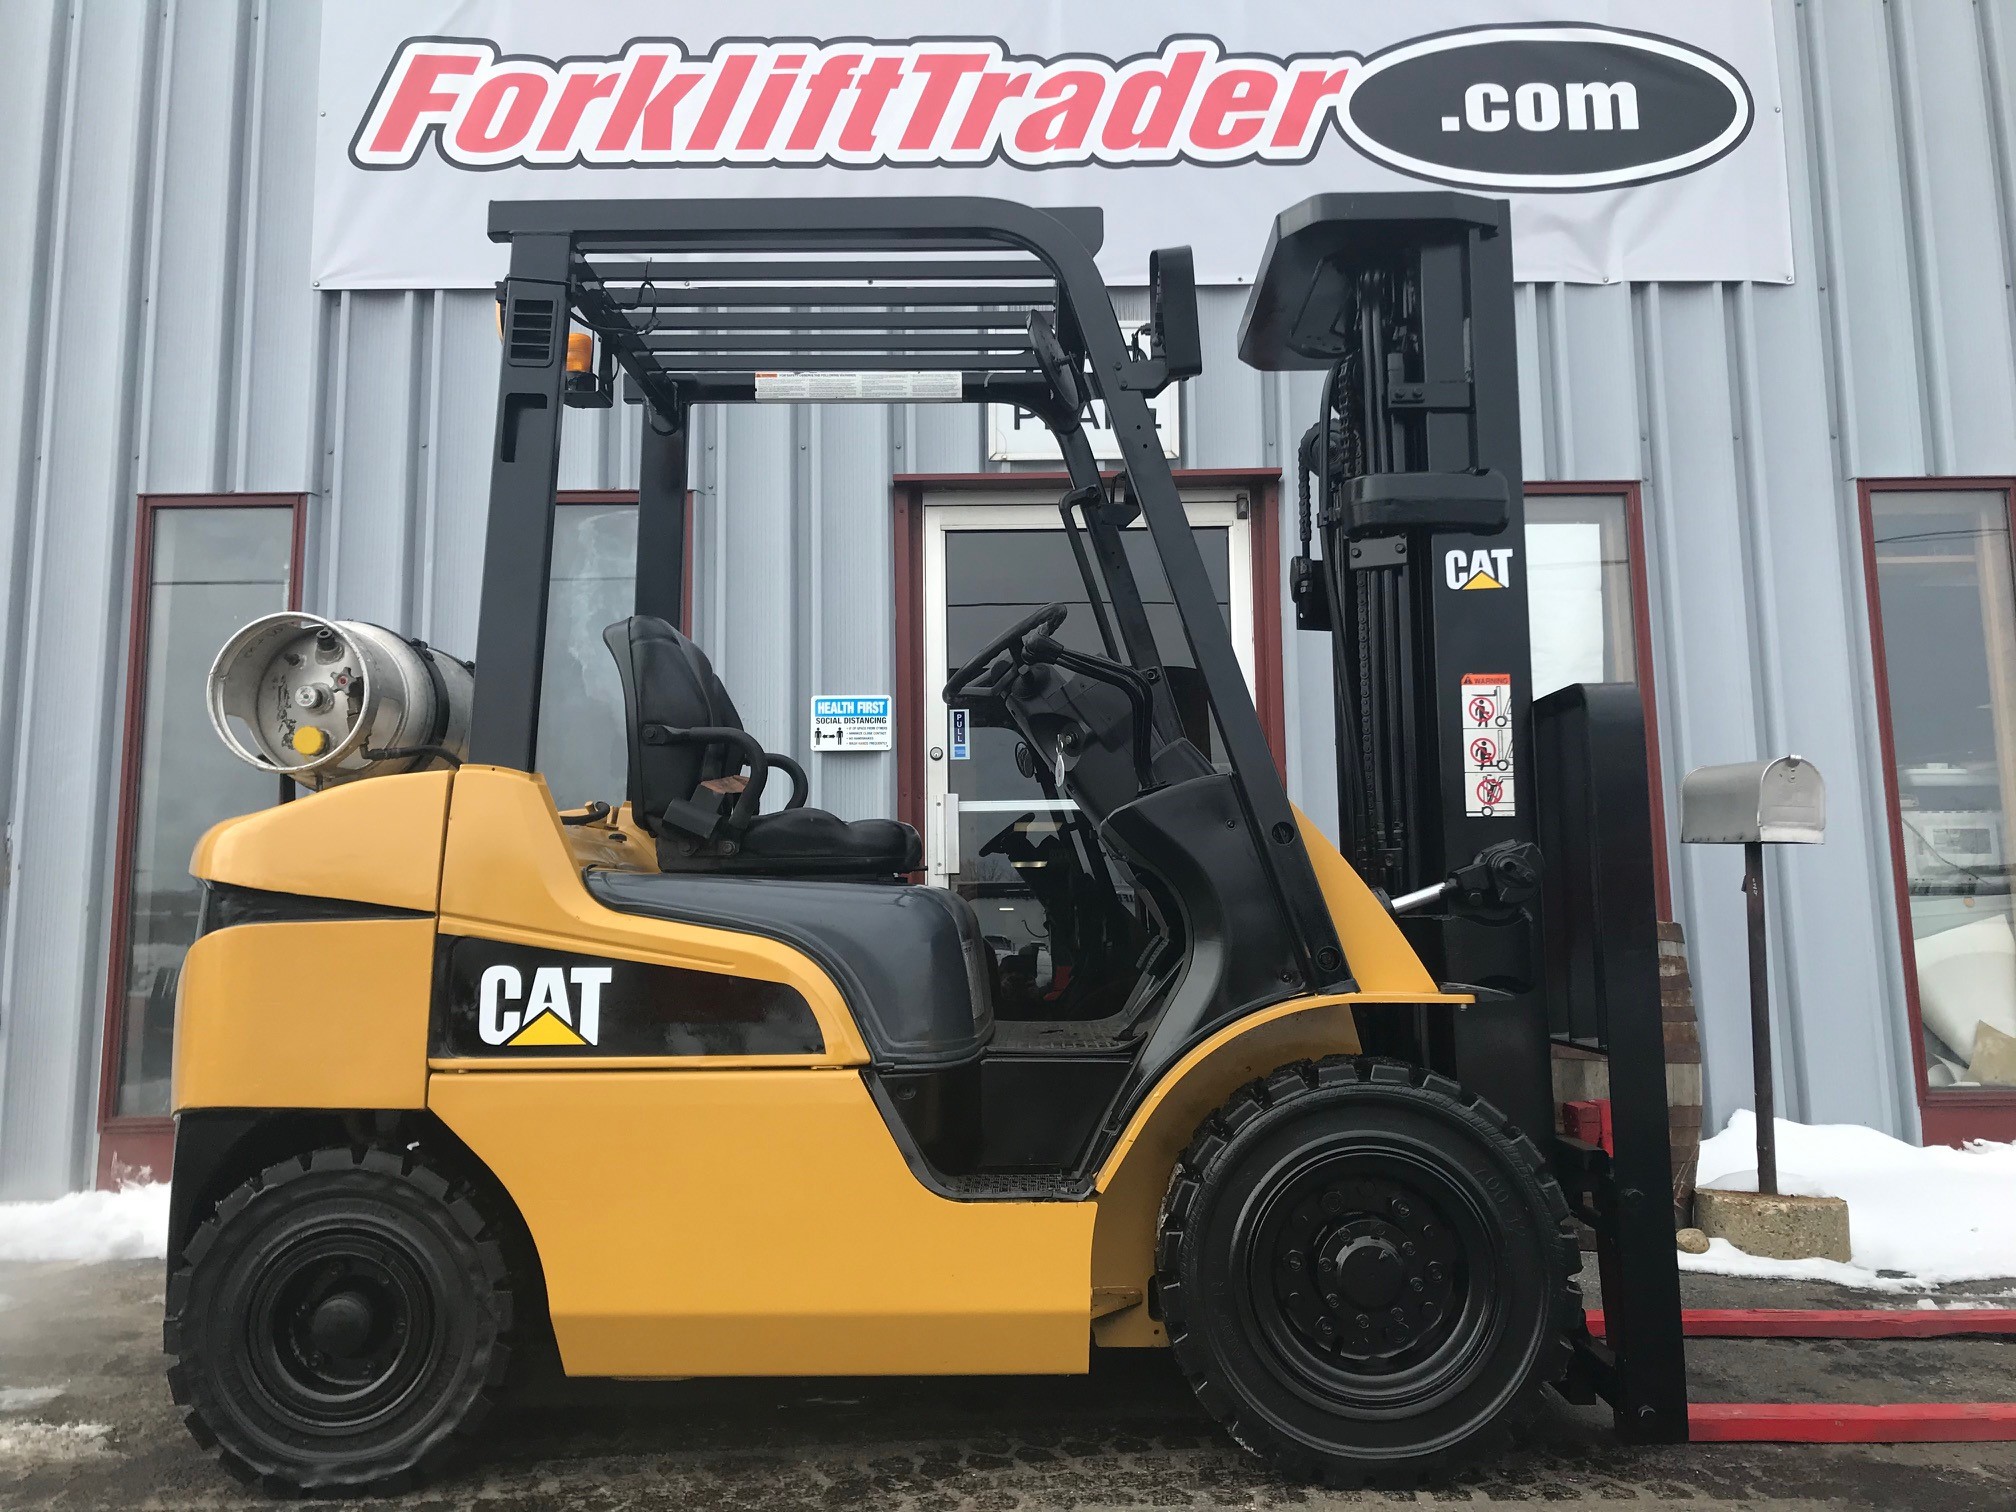 pneumatic tire forklift for sale near me